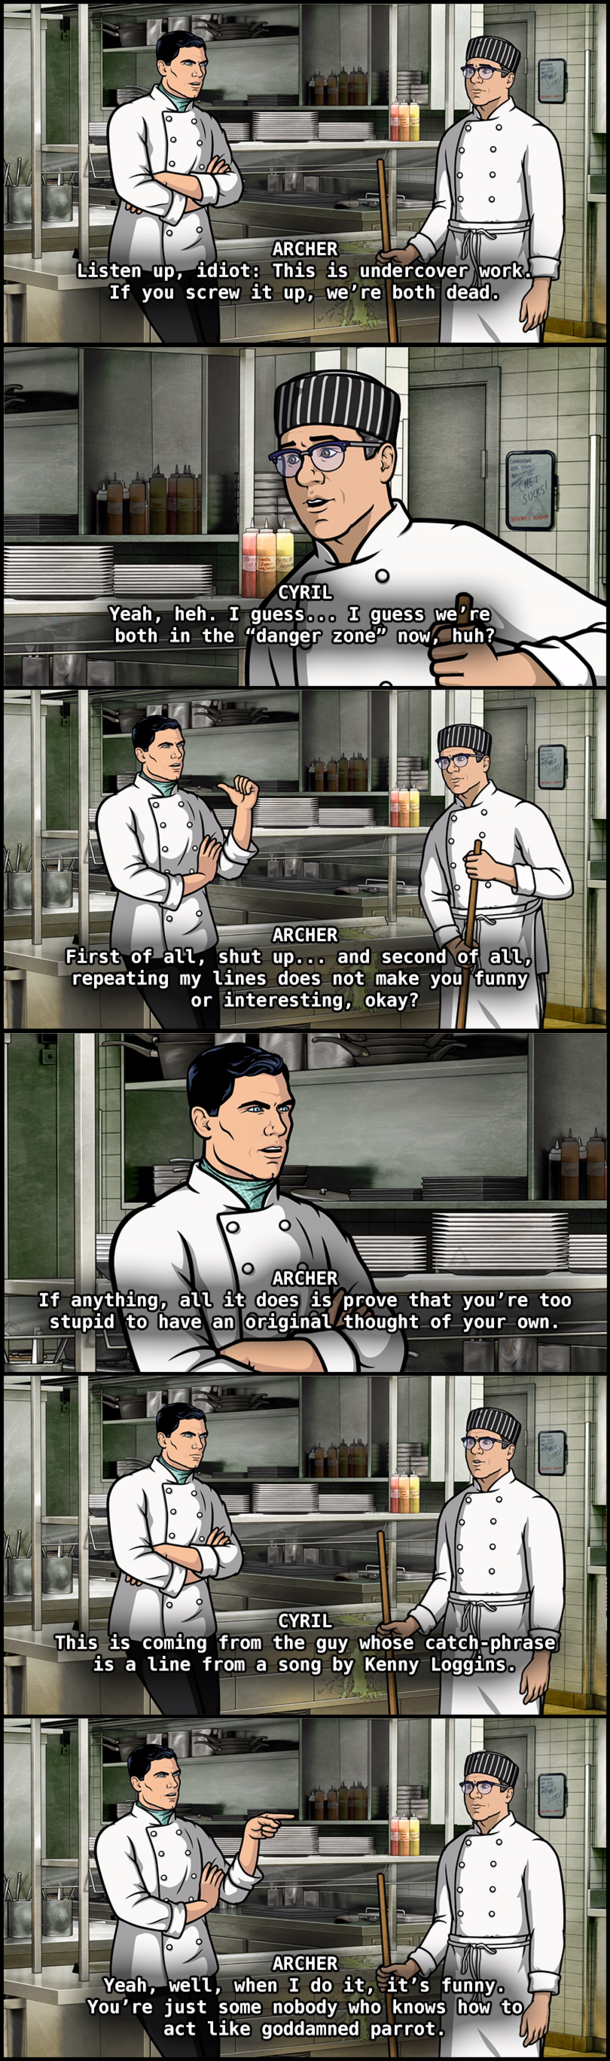 Archer must hate Internet comments